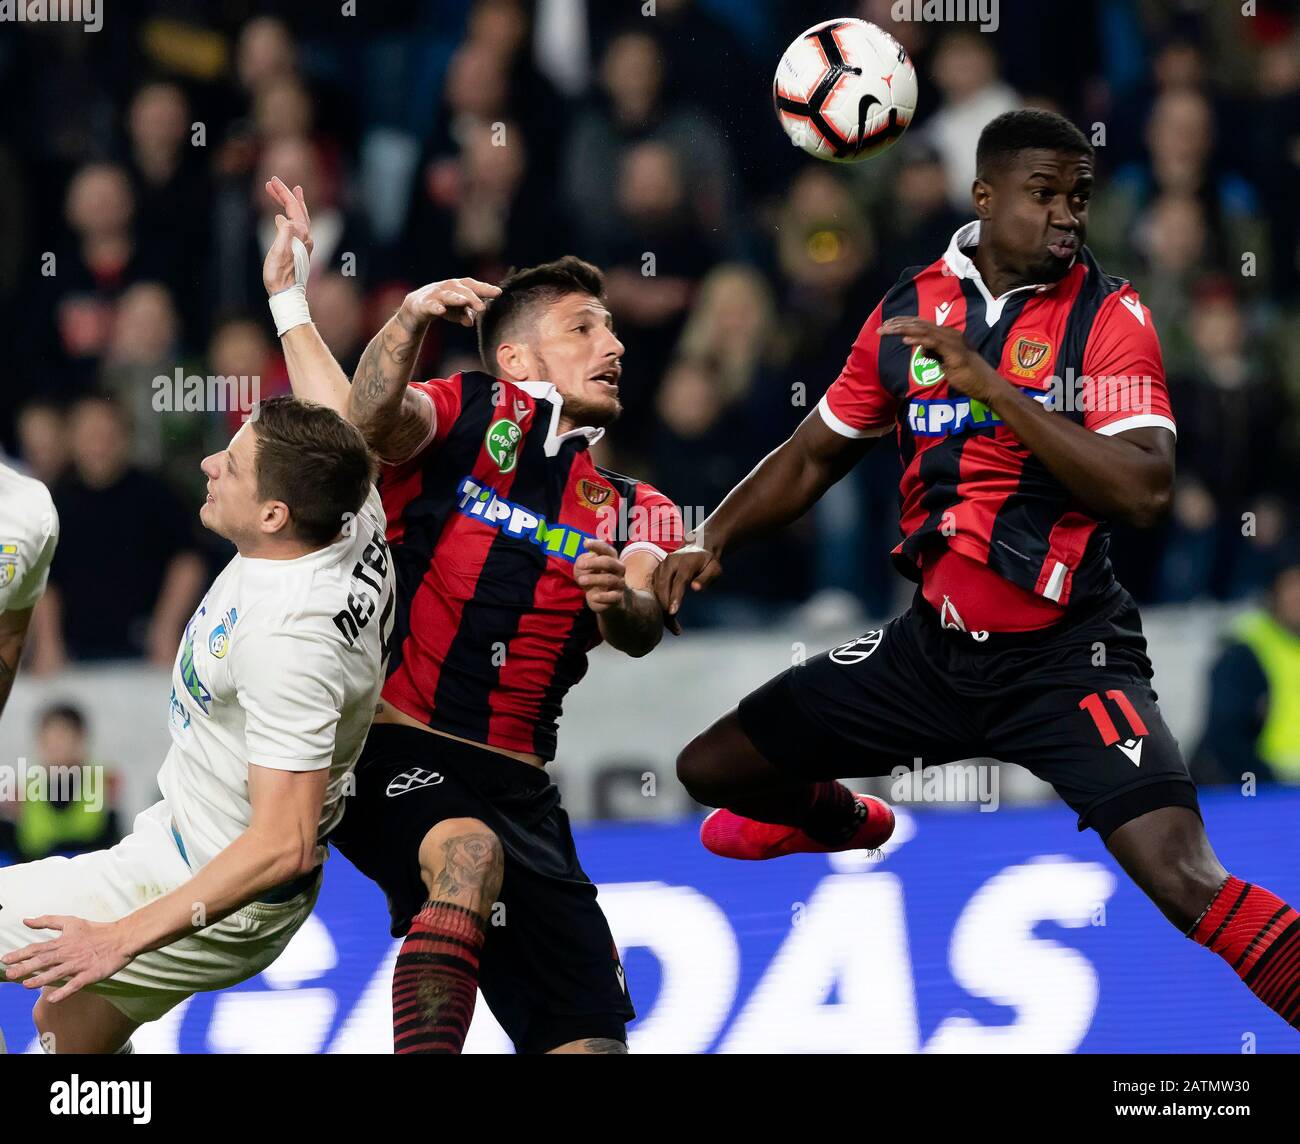 BUDAPEST, HUNGARY - FEBRUARY 1: (r-l) Mayron George of Budapest Honved, Bence Batik of Budapest Honved and Andrii Nesterov of Mezokovesd Zsory FC in action during the Hungarian OTP Bank Liga match between Budapest Honved and Mezokovesd Zsory FC at Nandor Hidegkuti Stadium on February 1, 2020 in Budapest, Hungary. Stock Photo